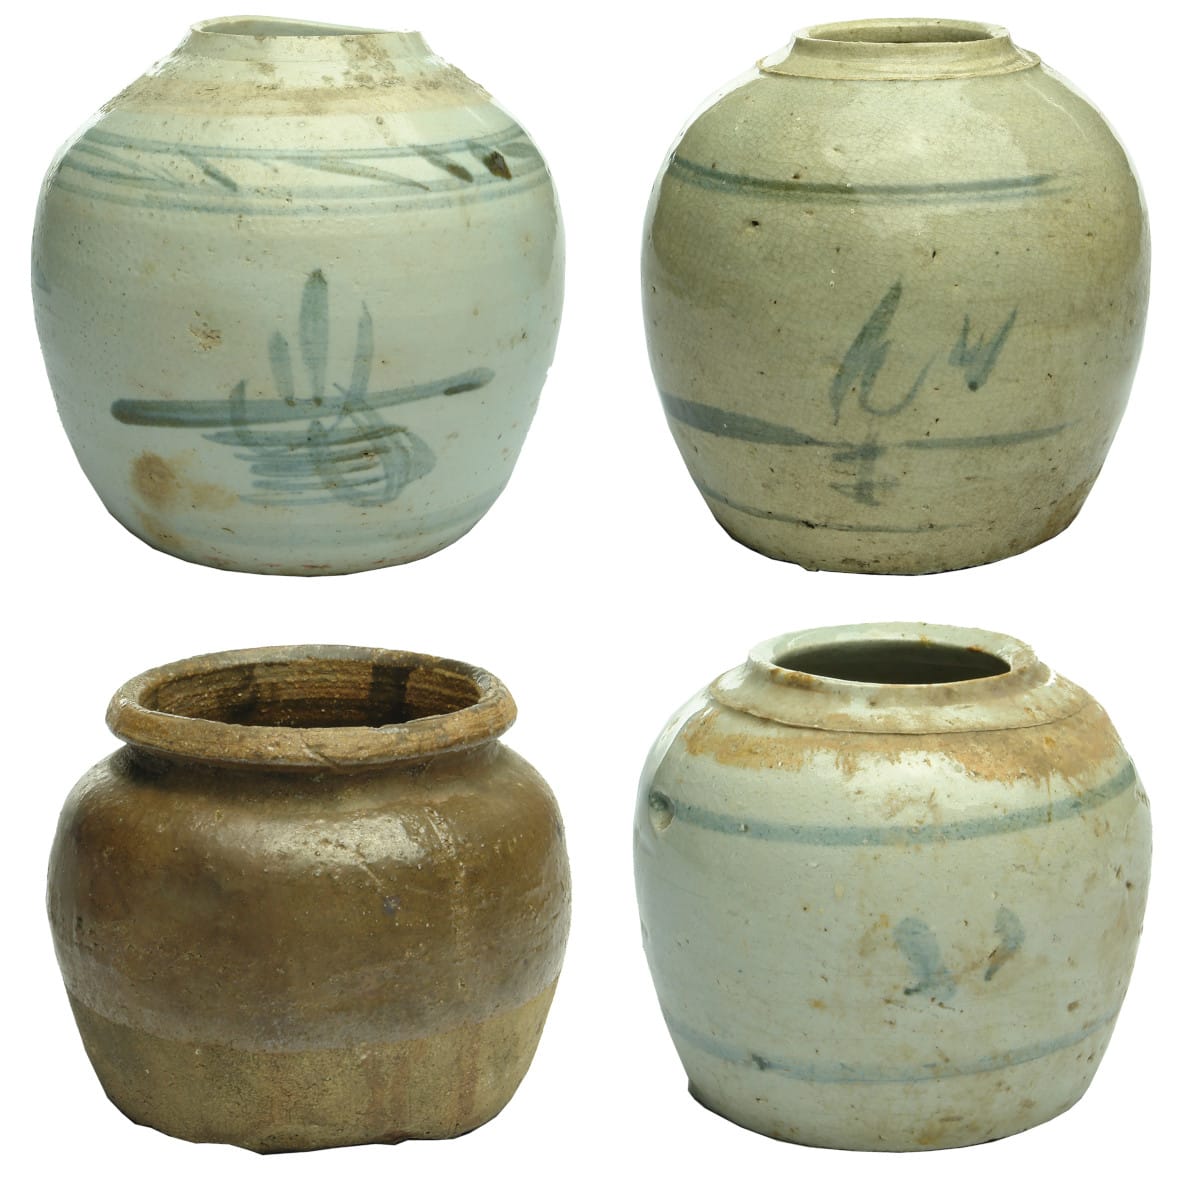 4 Chinese Jars. 1. & 2. Blue and Grey-Green brush strokes decoration. 3. & 4. Wide mouth brown glaze and a Grey/Blue Ginger Jar.